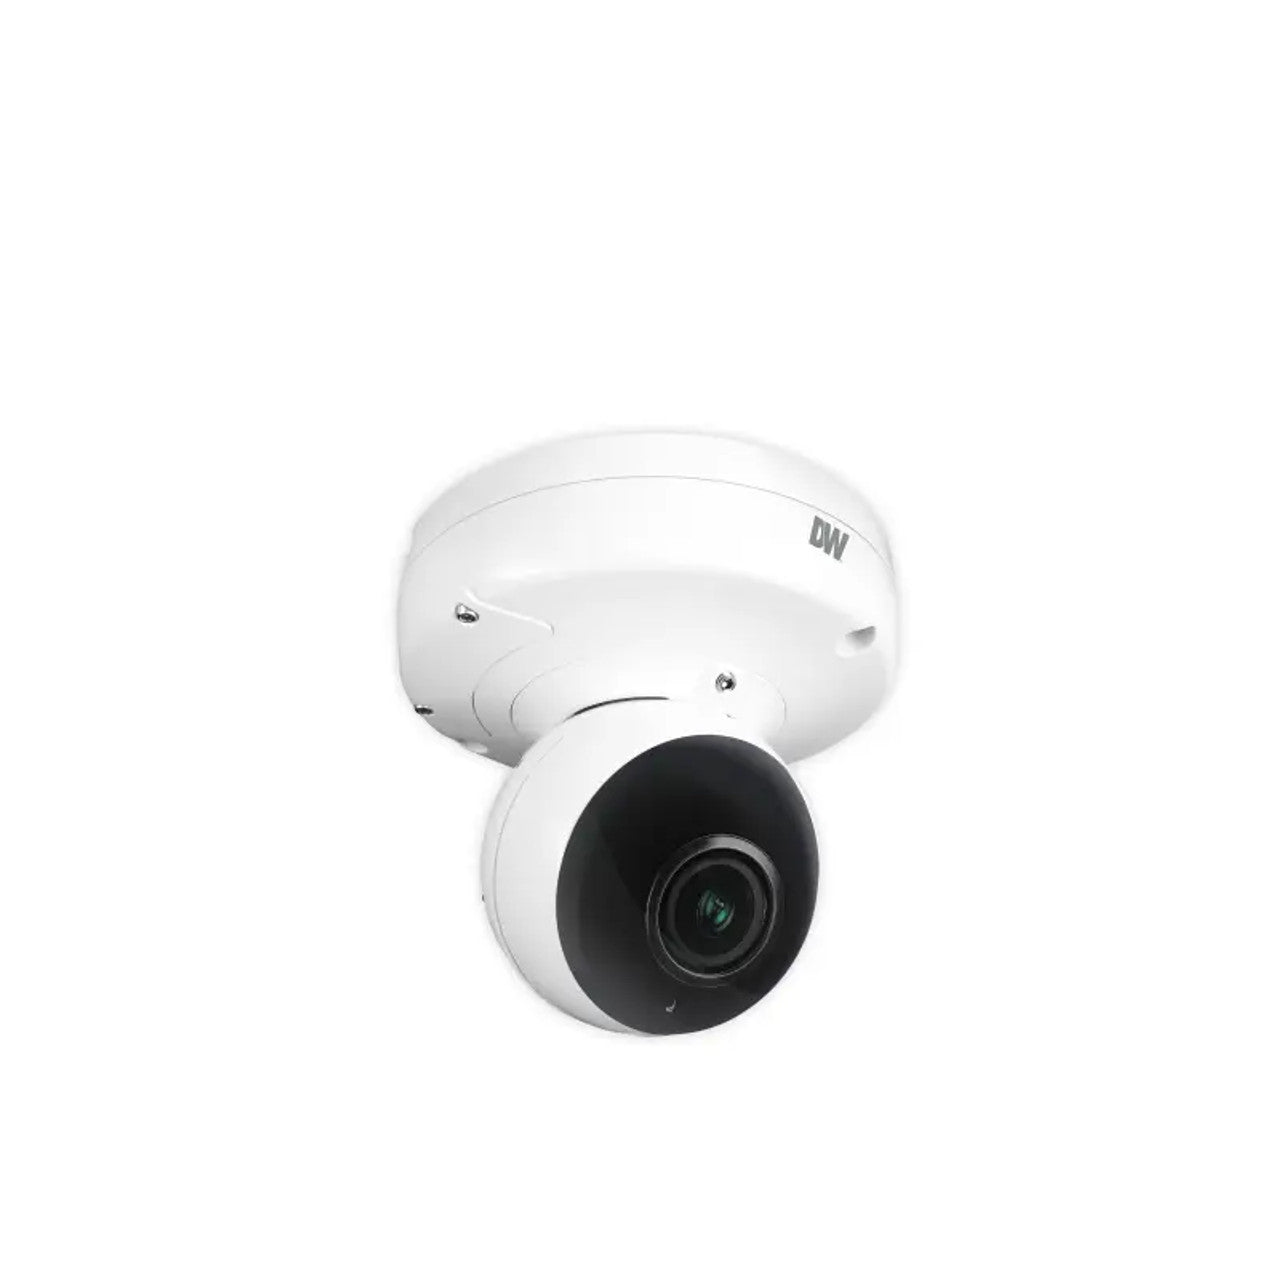 Digital Watchdog DWC-MPVD8WiATW 8MP 4K Night Vision Outdoor Eyeball IP Security Camera with IVA Plus